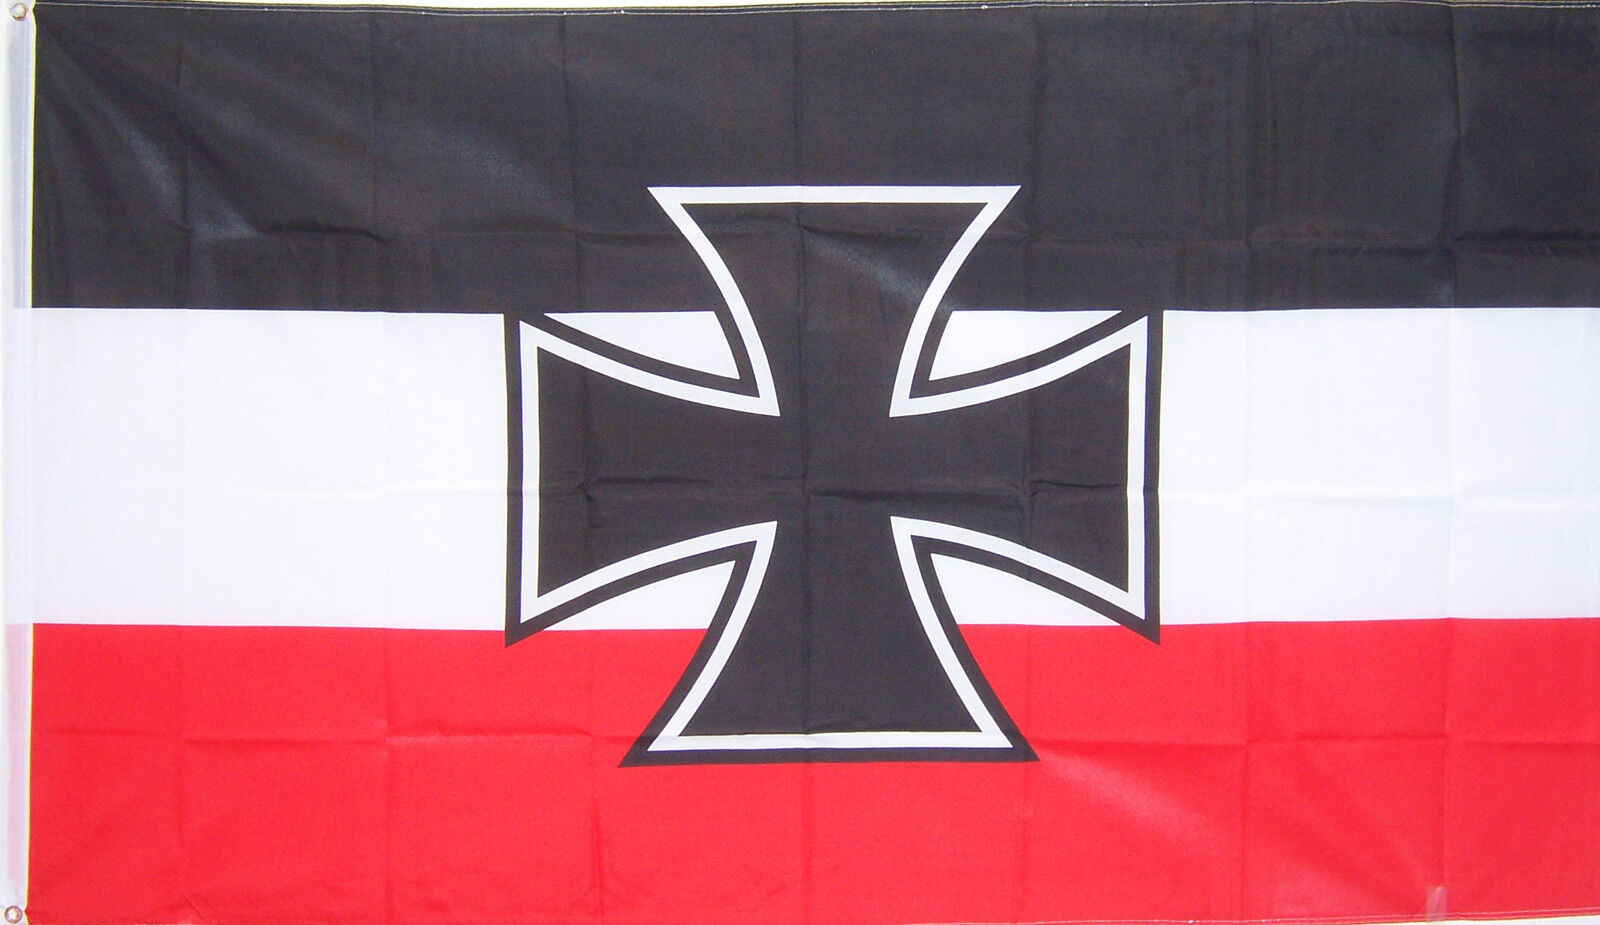 NEW 3ftx5ft GERMAN NAVY JACK IRON CROSS FLAG DOUBLE SIDED better quality 